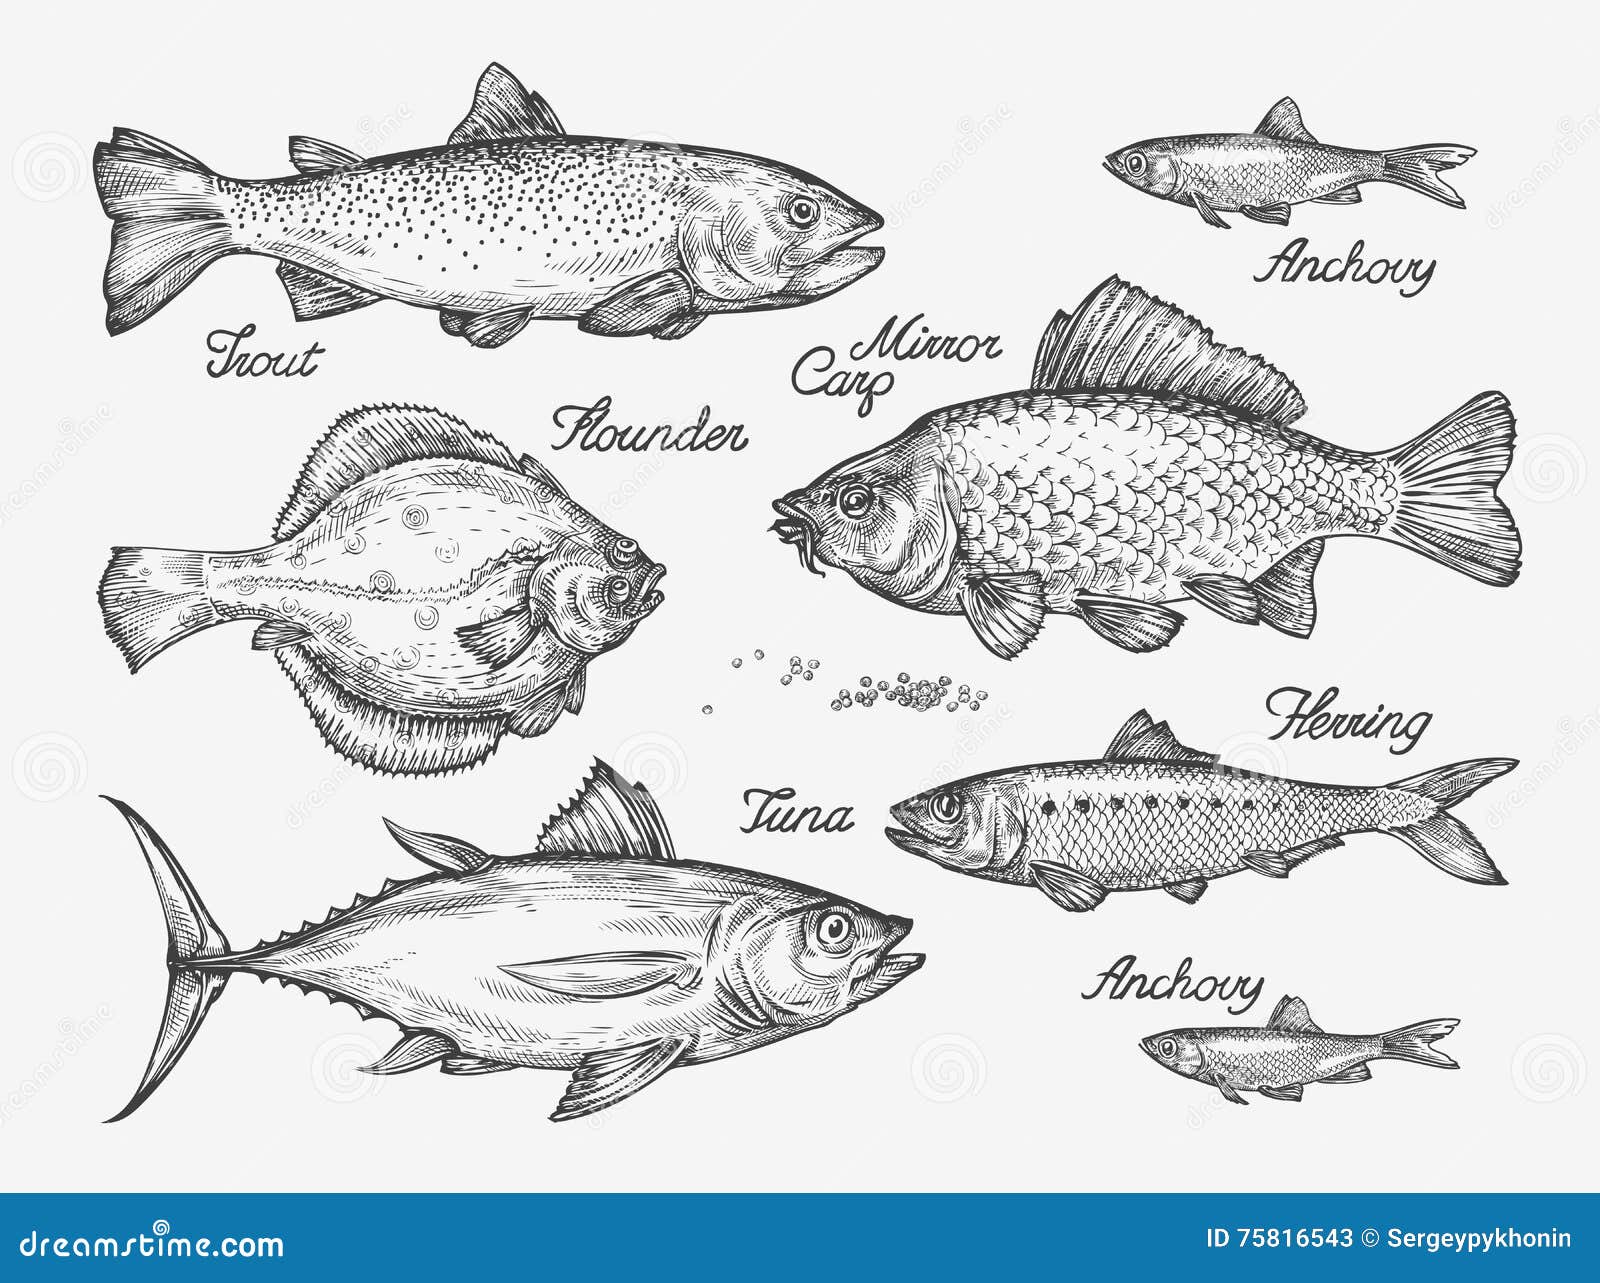 hand drawn fish. sketch trout, carp, tuna, herring, flounder, anchovy.  